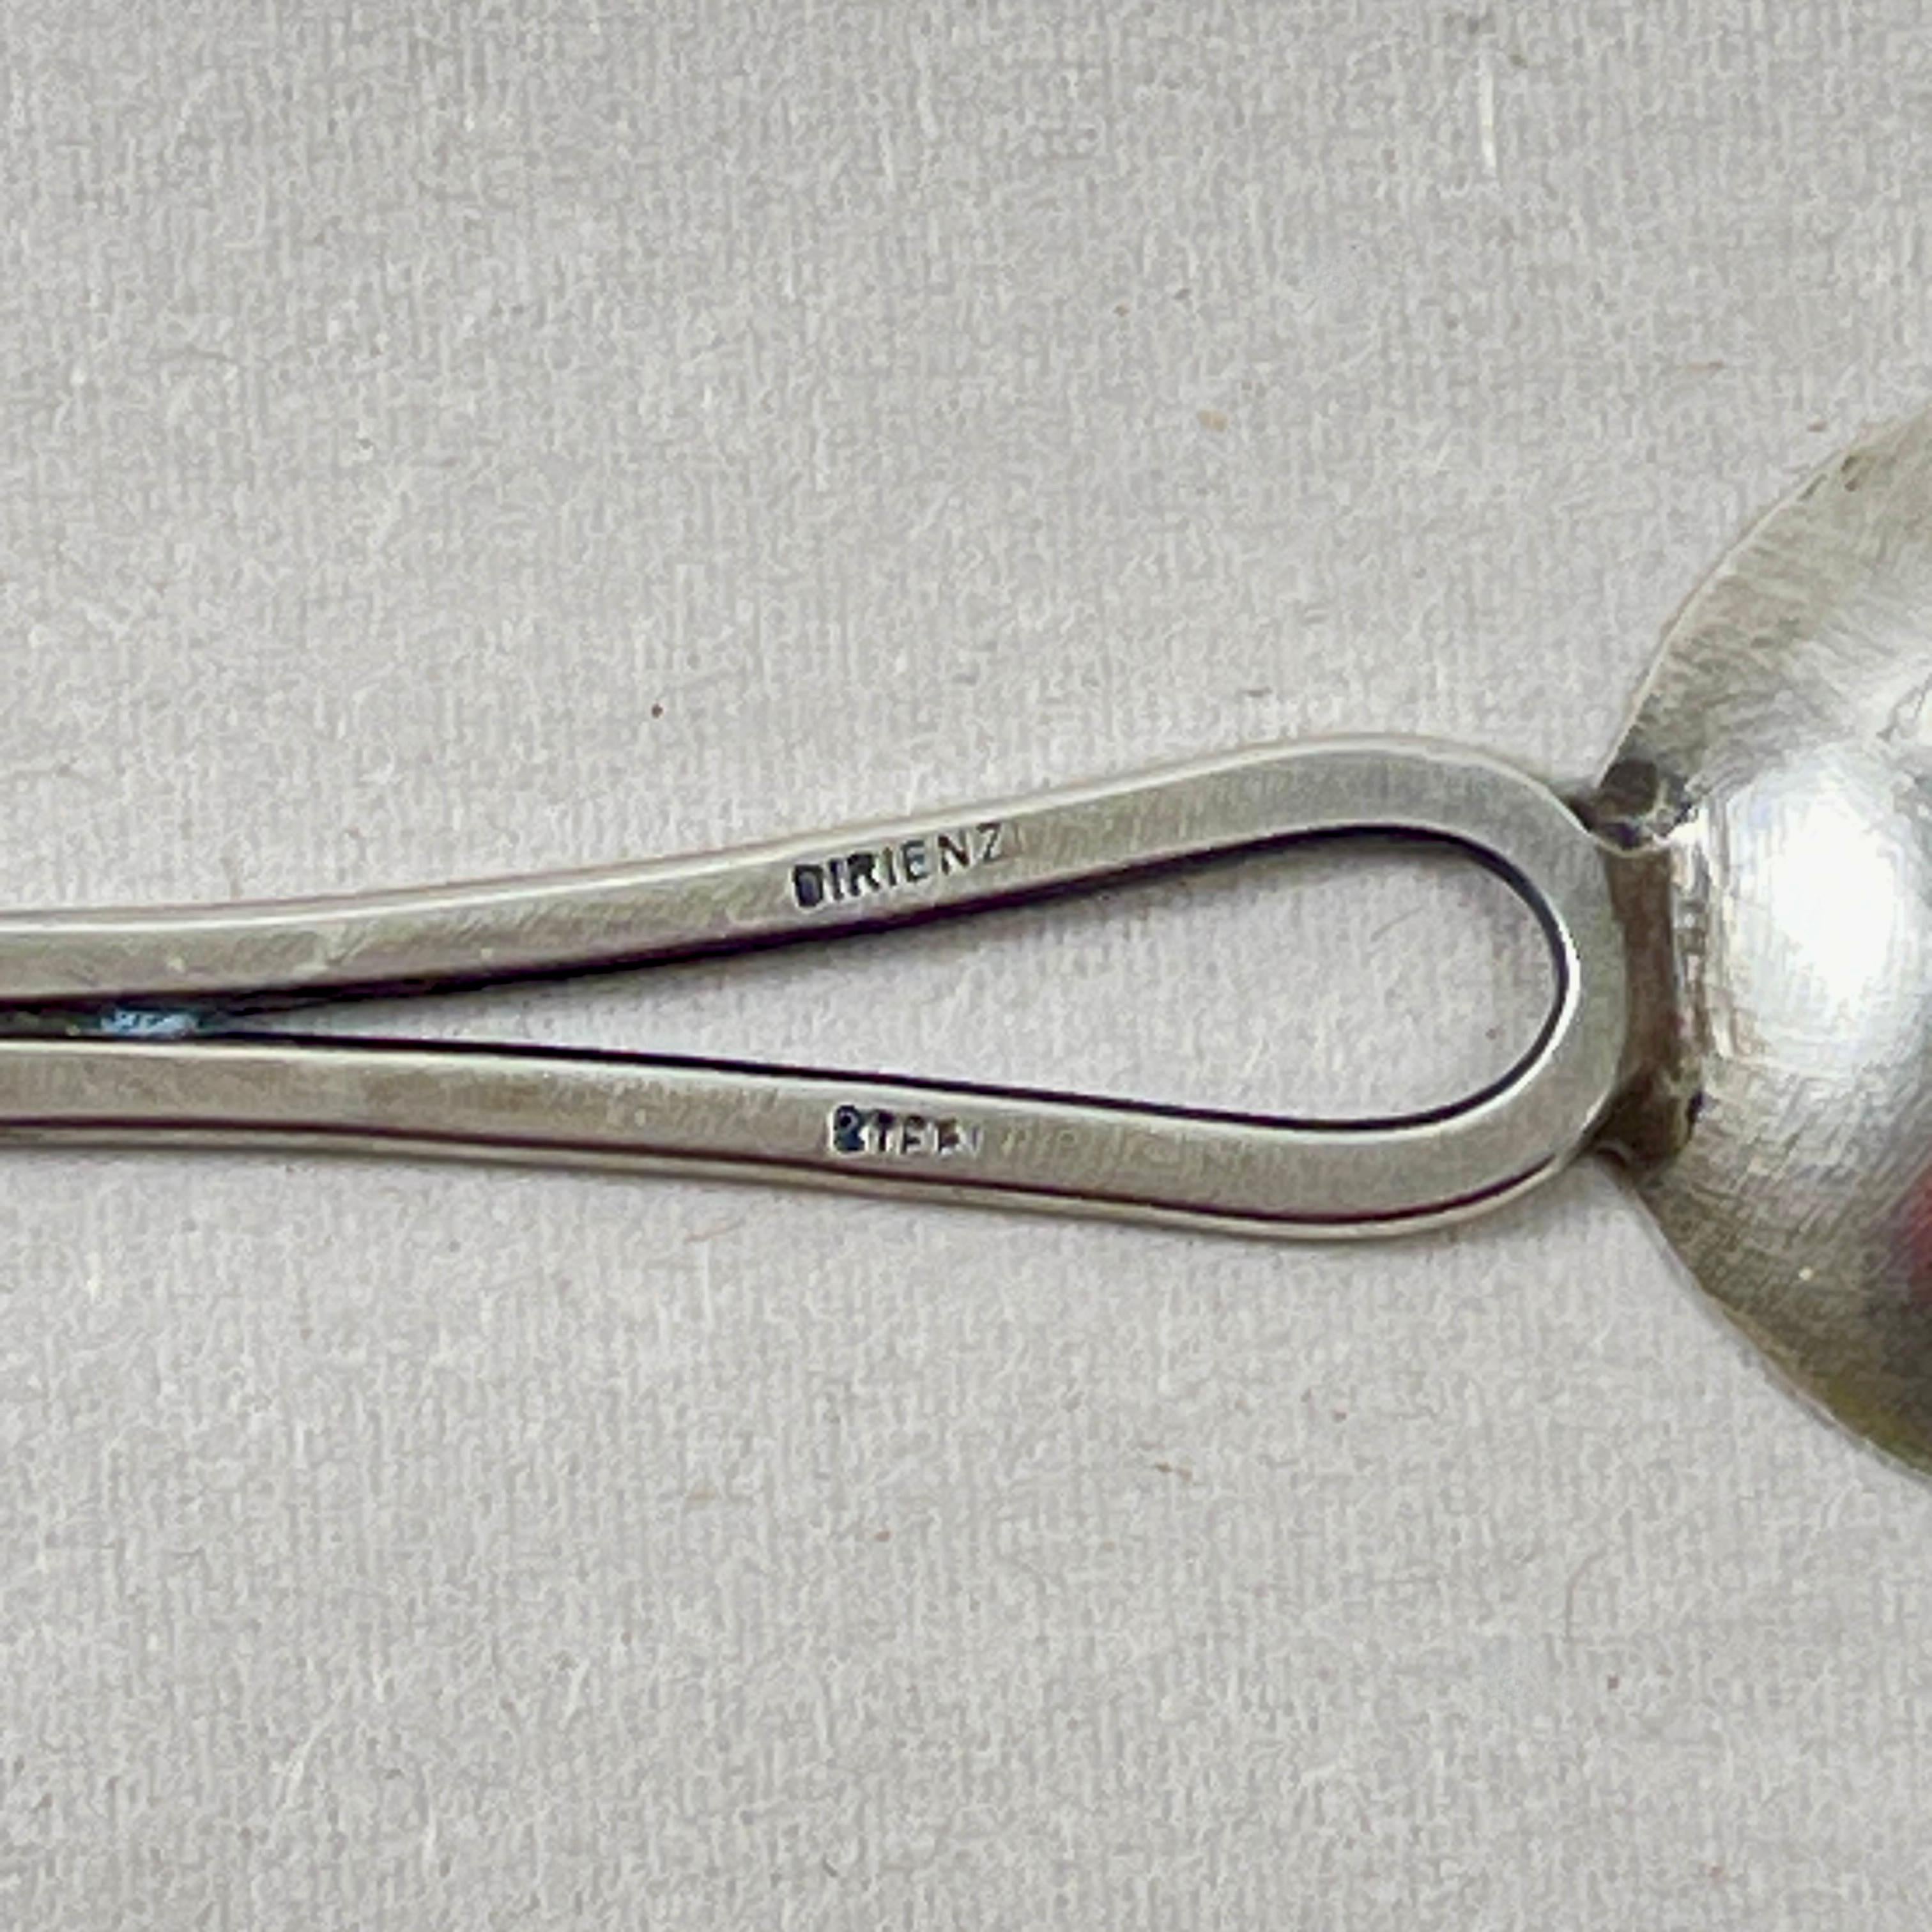 Anthony DiRienzi Silversmith Studio Hand Made Sterling Silver Spoon For Sale 1